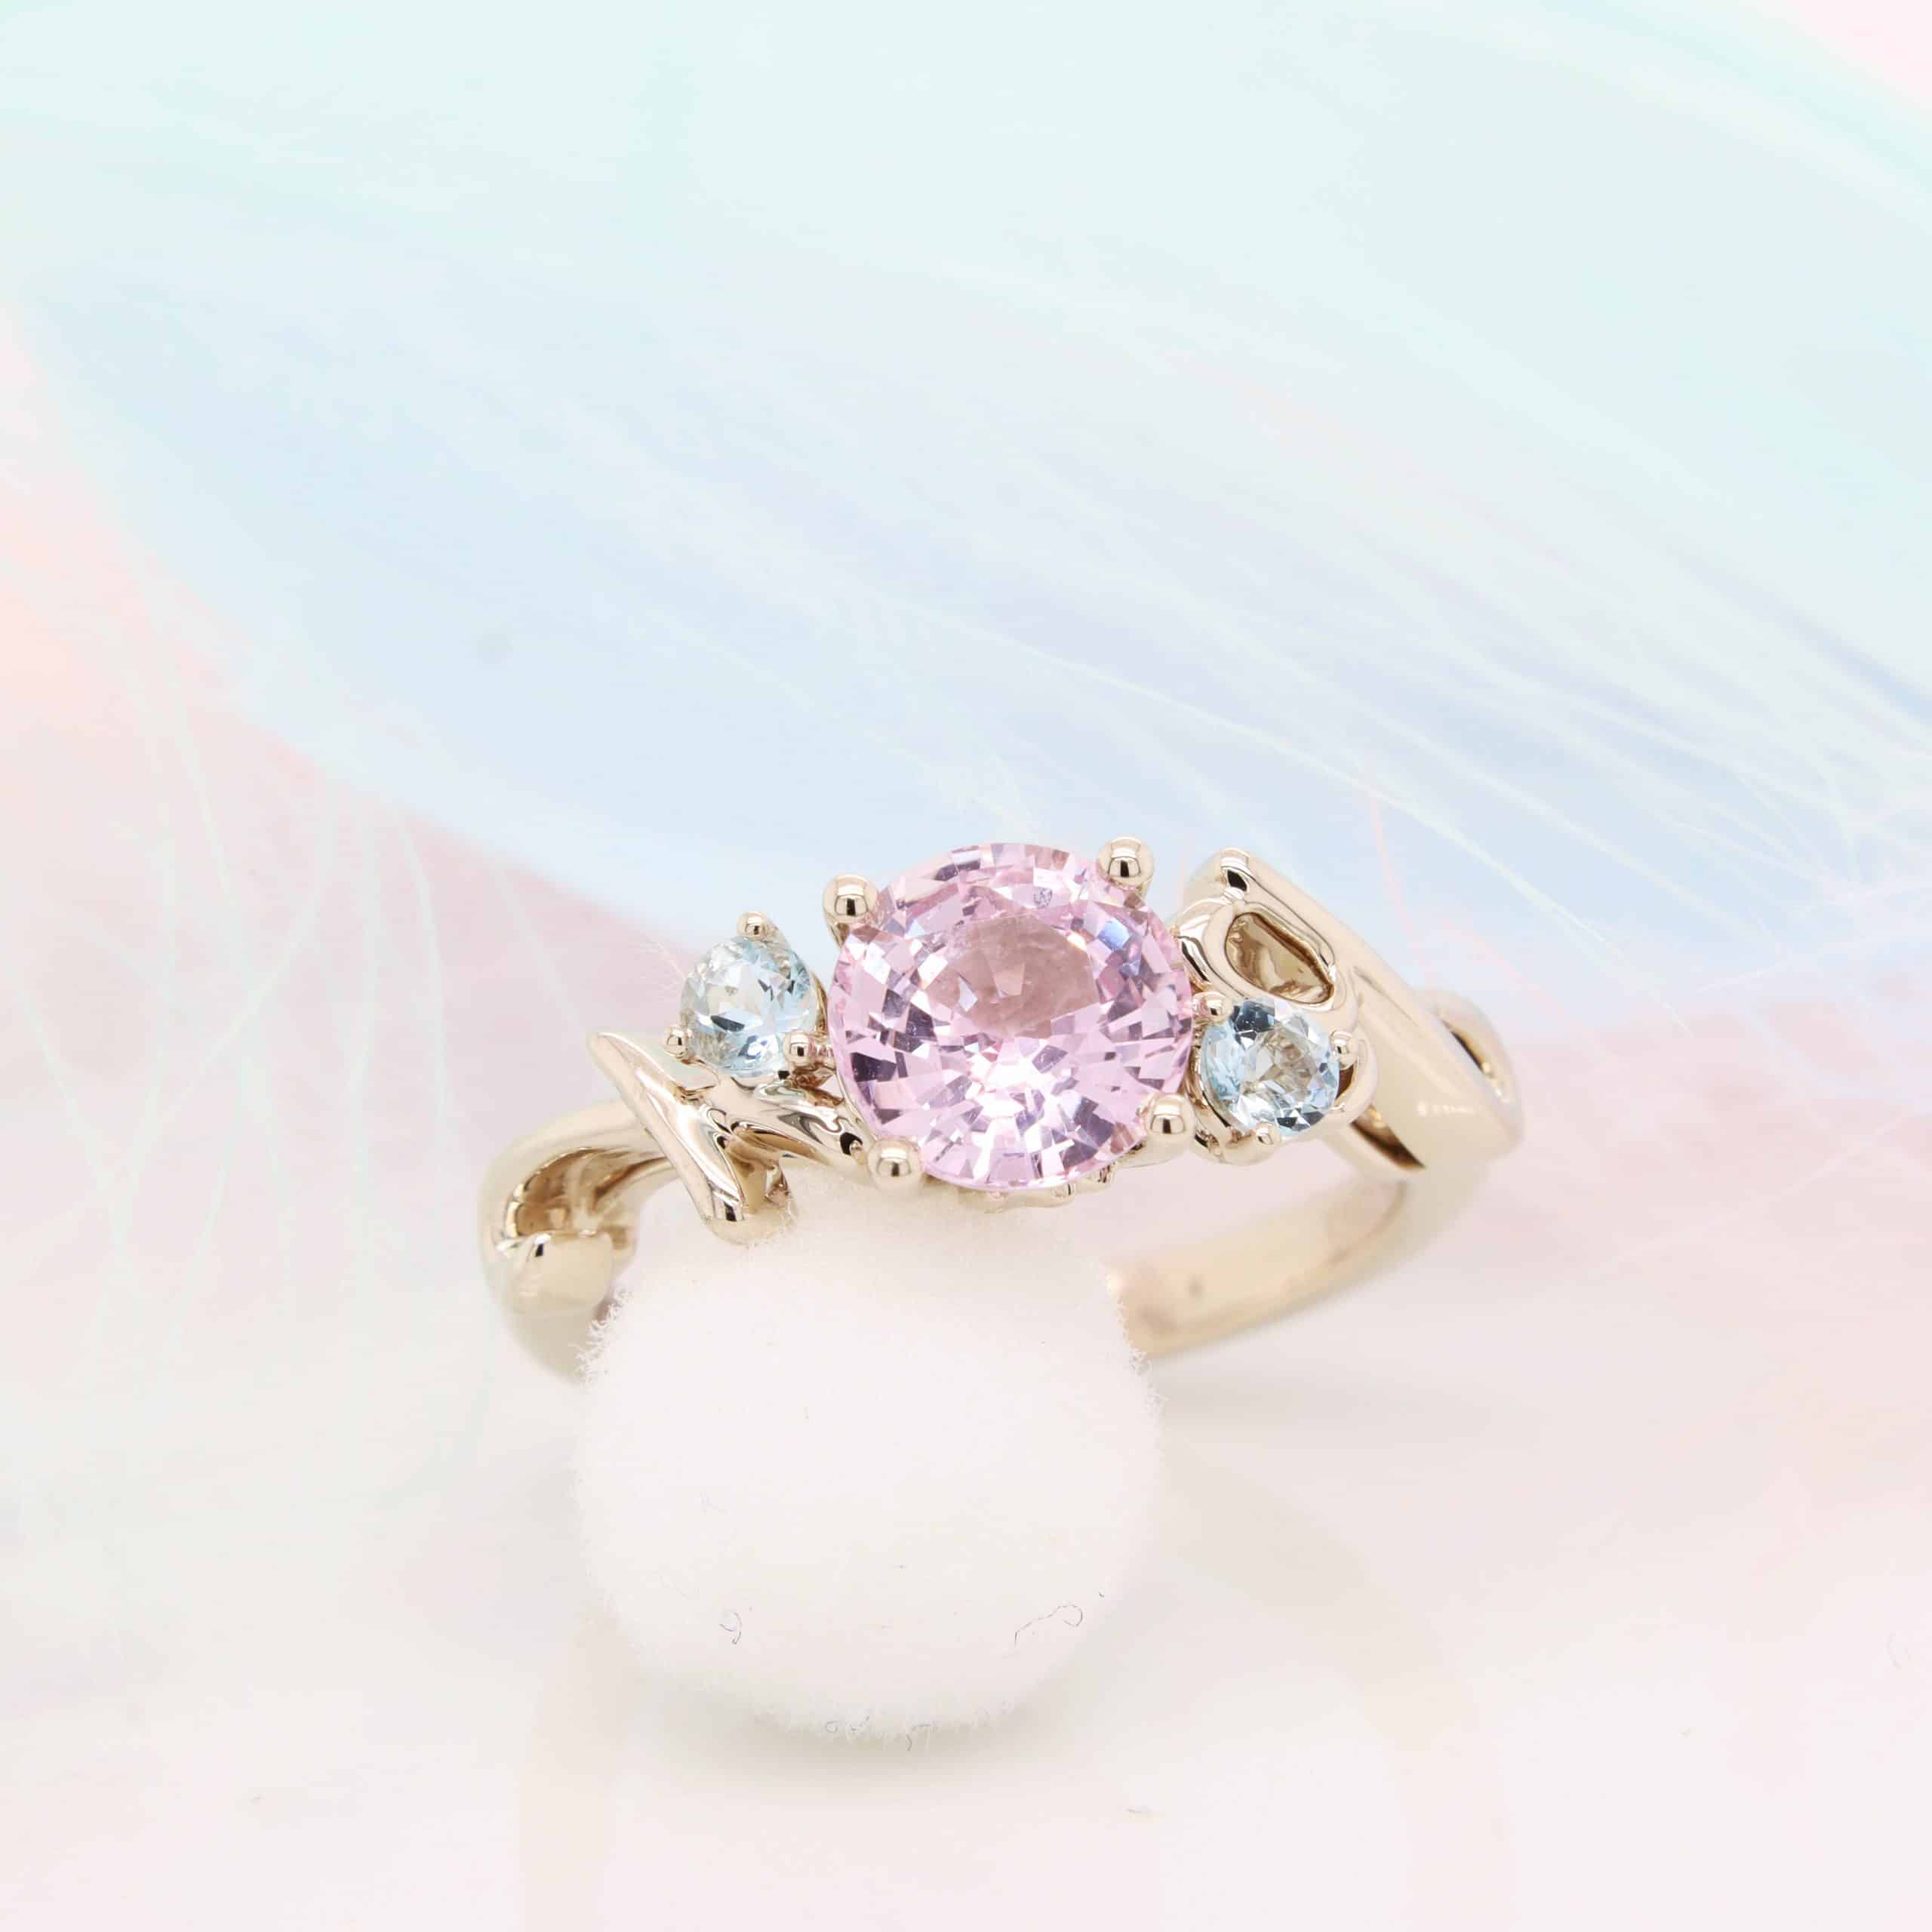 Personalised engagement ring - Featuring a round brilliance pink sapphire.